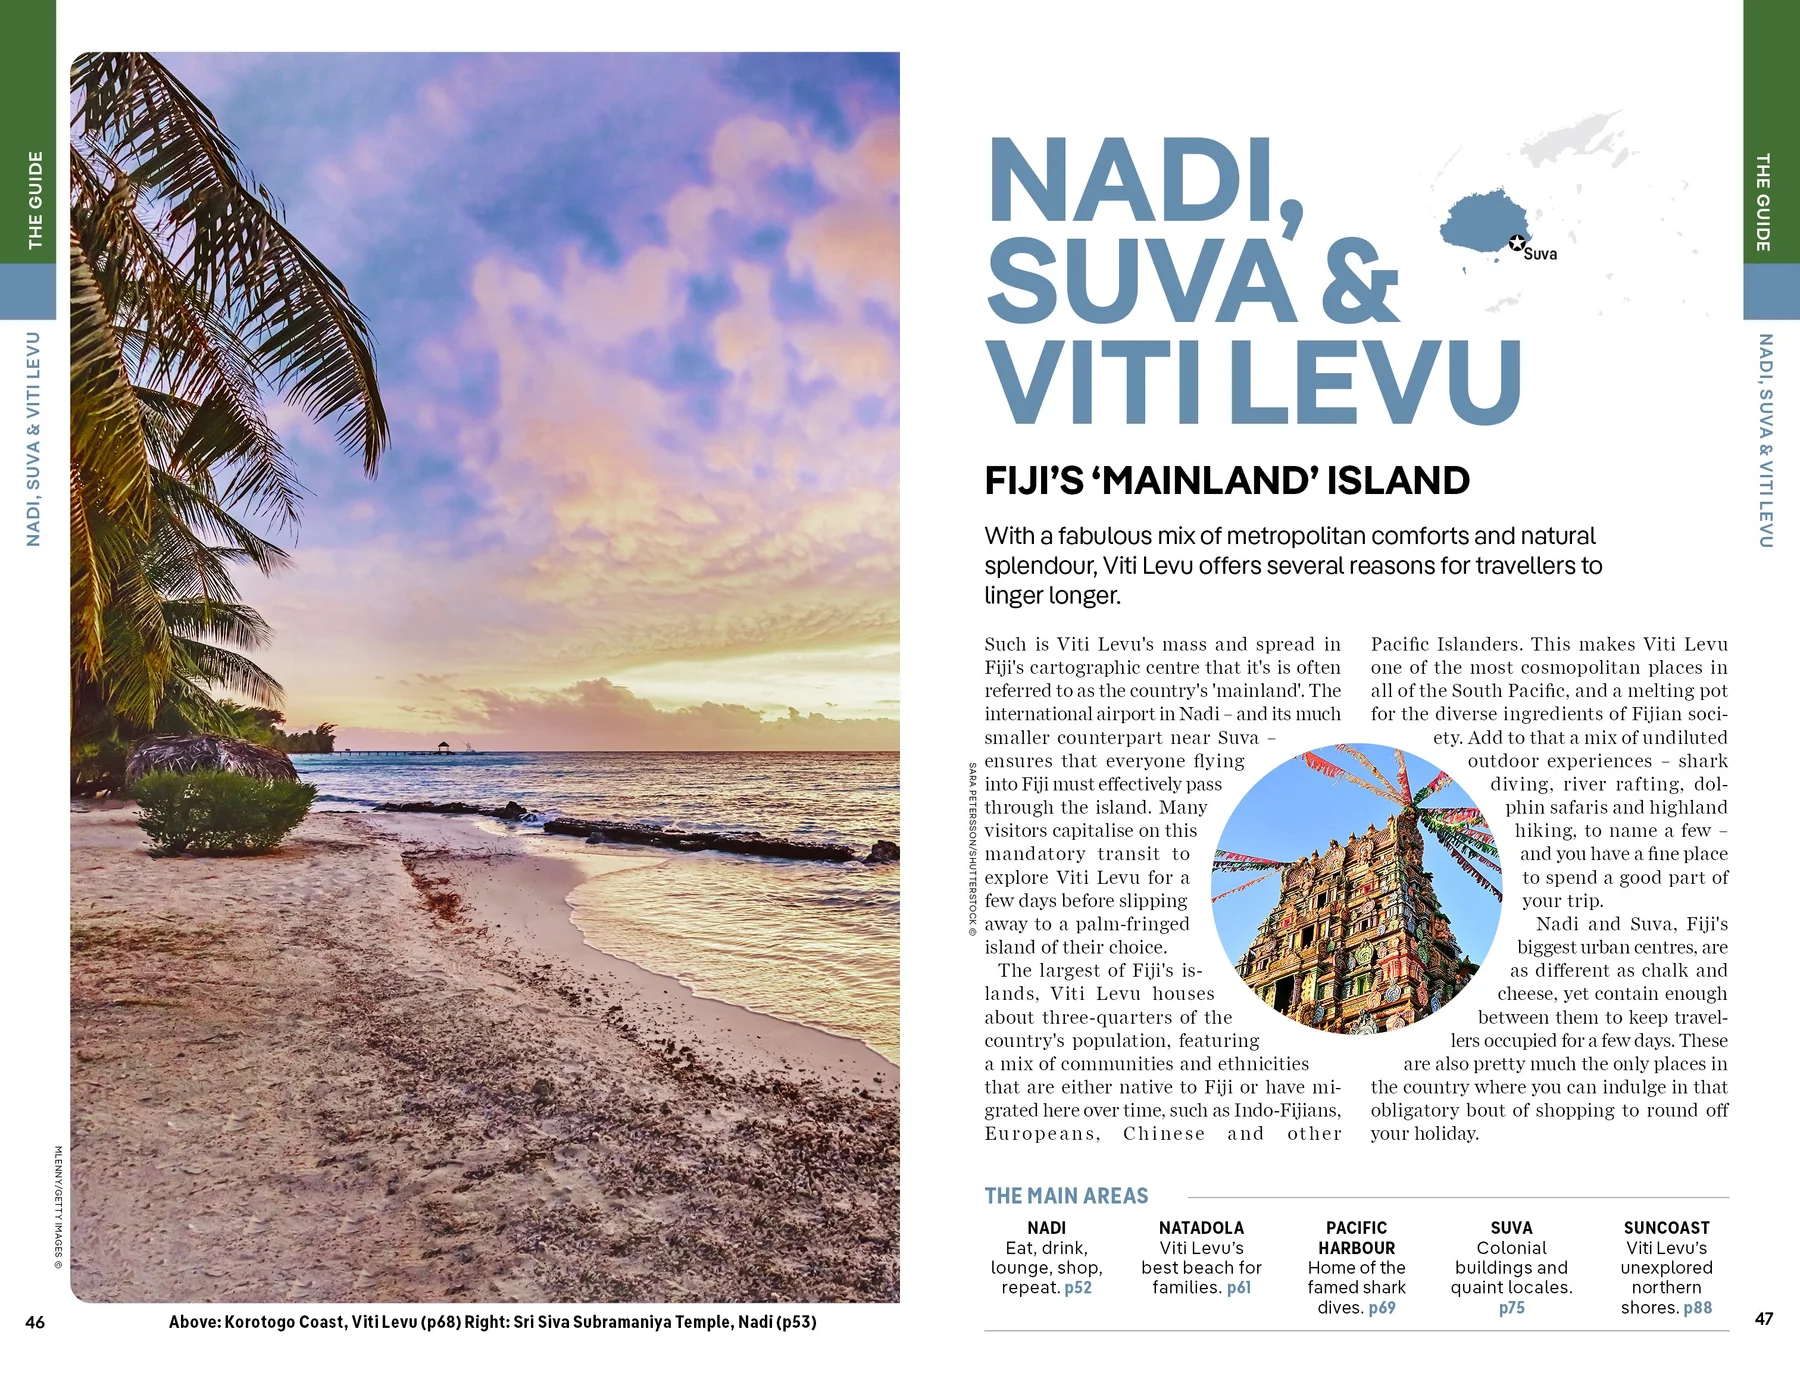 Fiji Lonely Planet